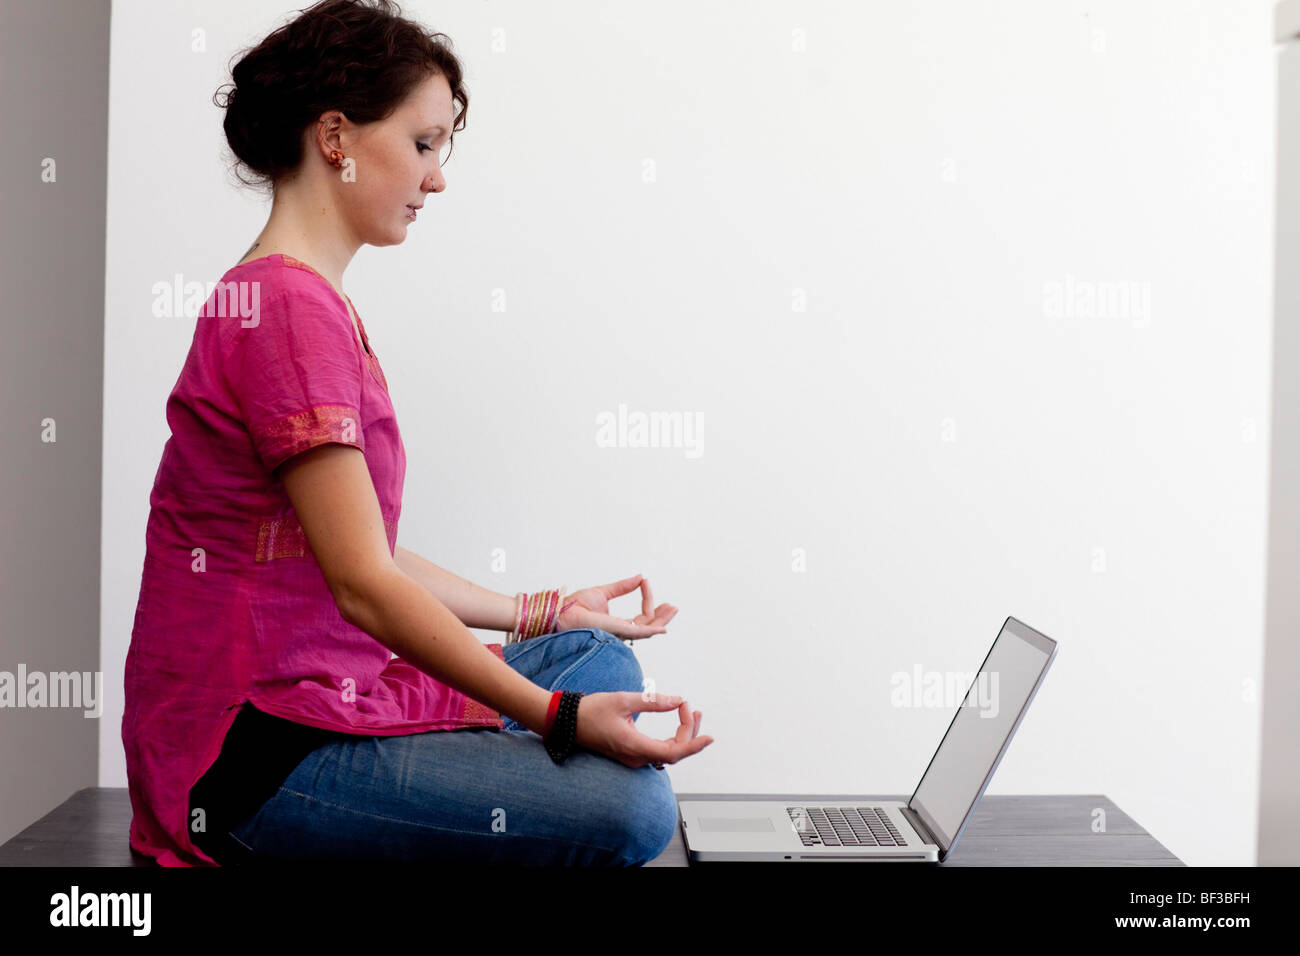 Meditation in front of a notebook Stock Photo